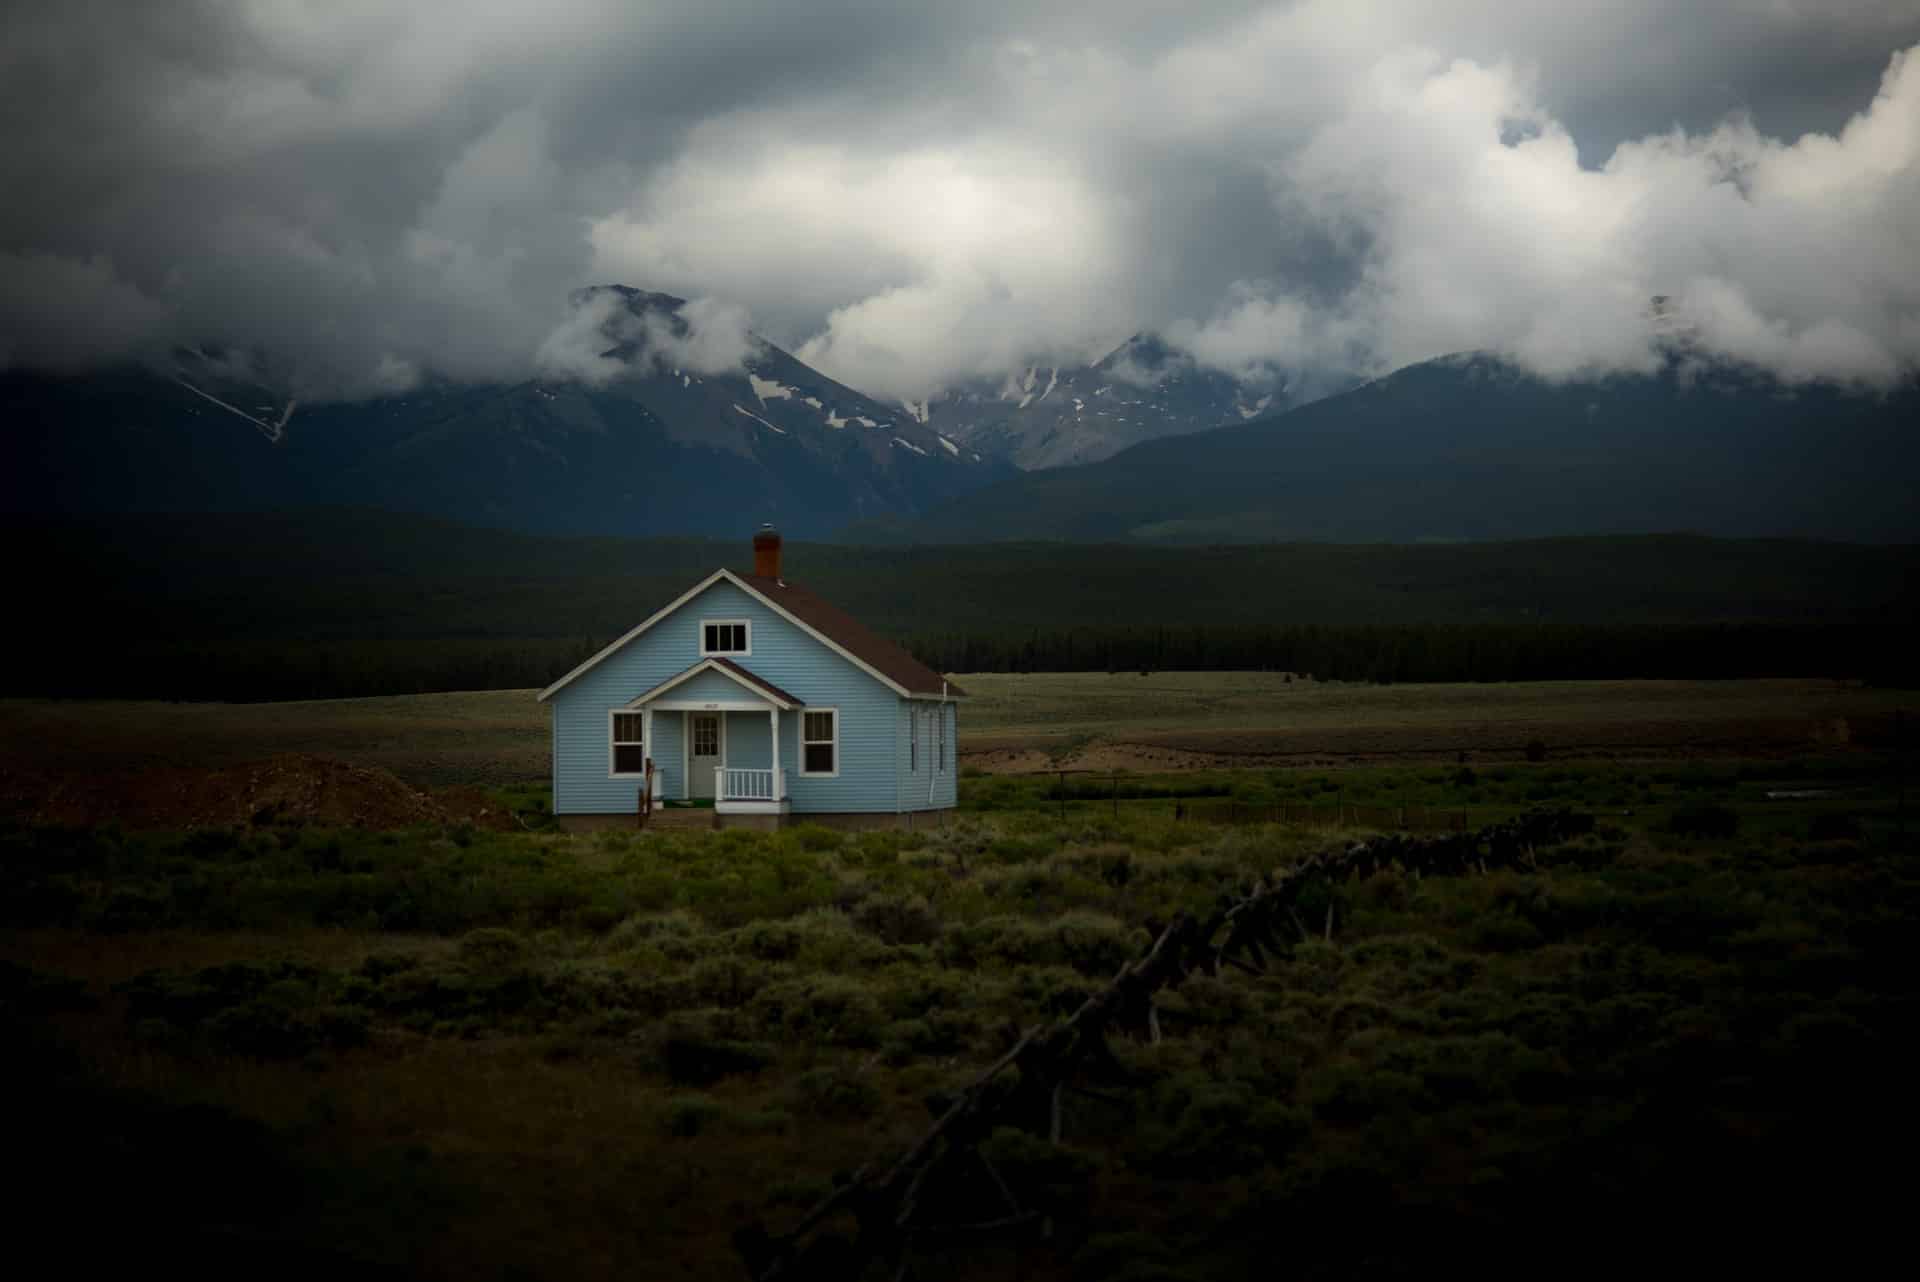 A small blue house on a wide expanse of empty property with mountains in the background, representing estate trustees, executors, and the rule against self-dealing